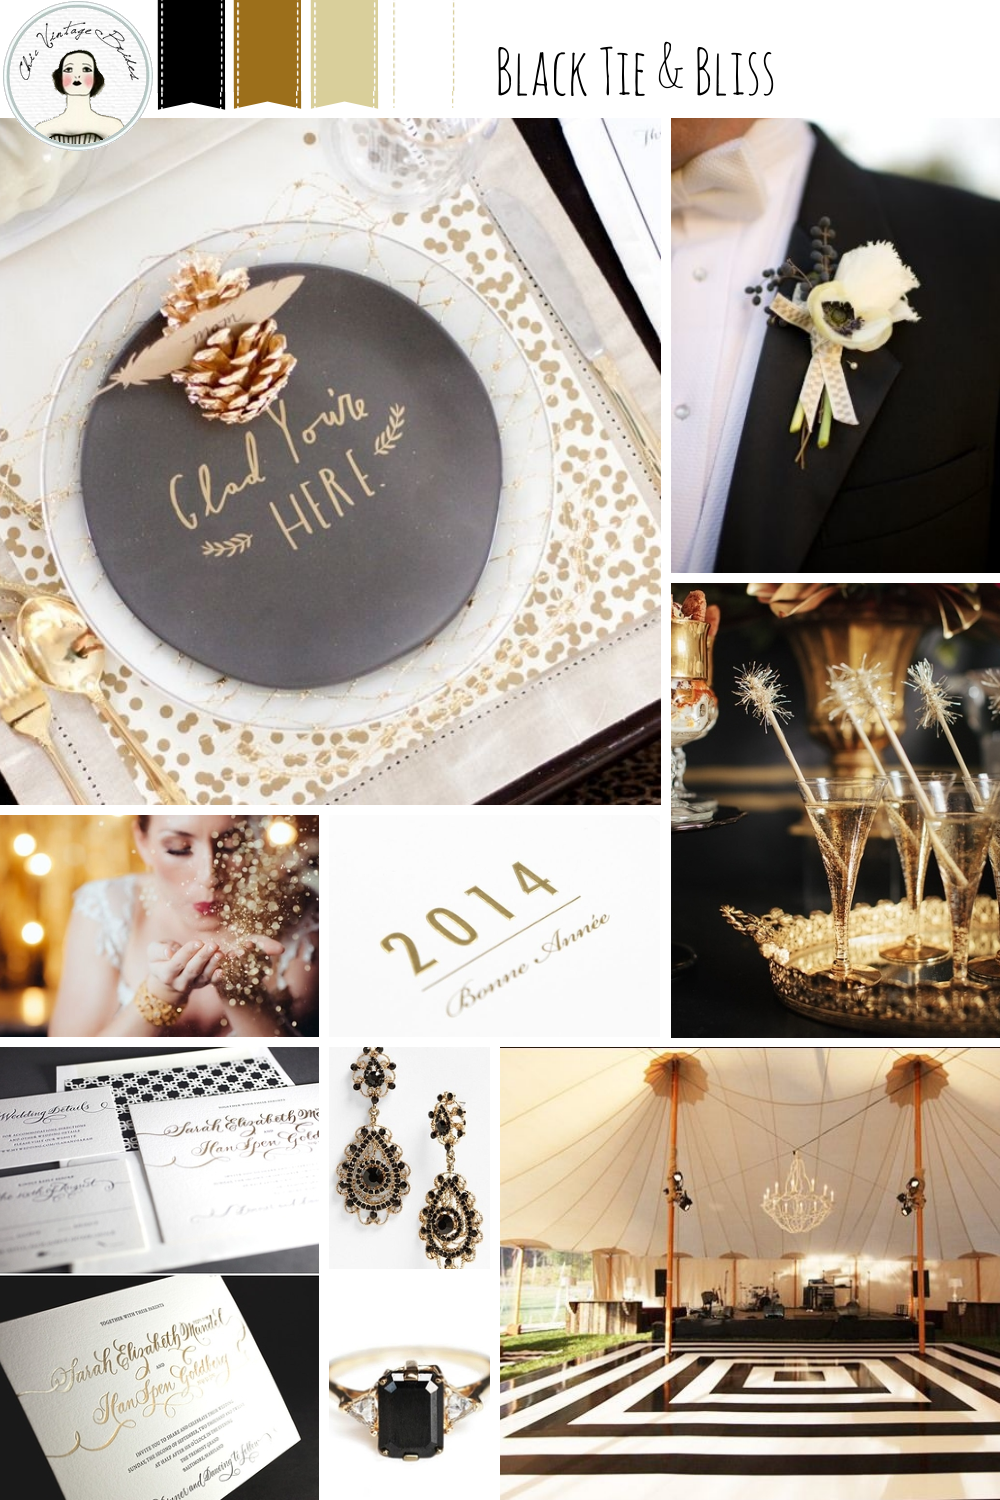 New Year's Eve Wedding Inspiration Board in Black, Gold and Ivory